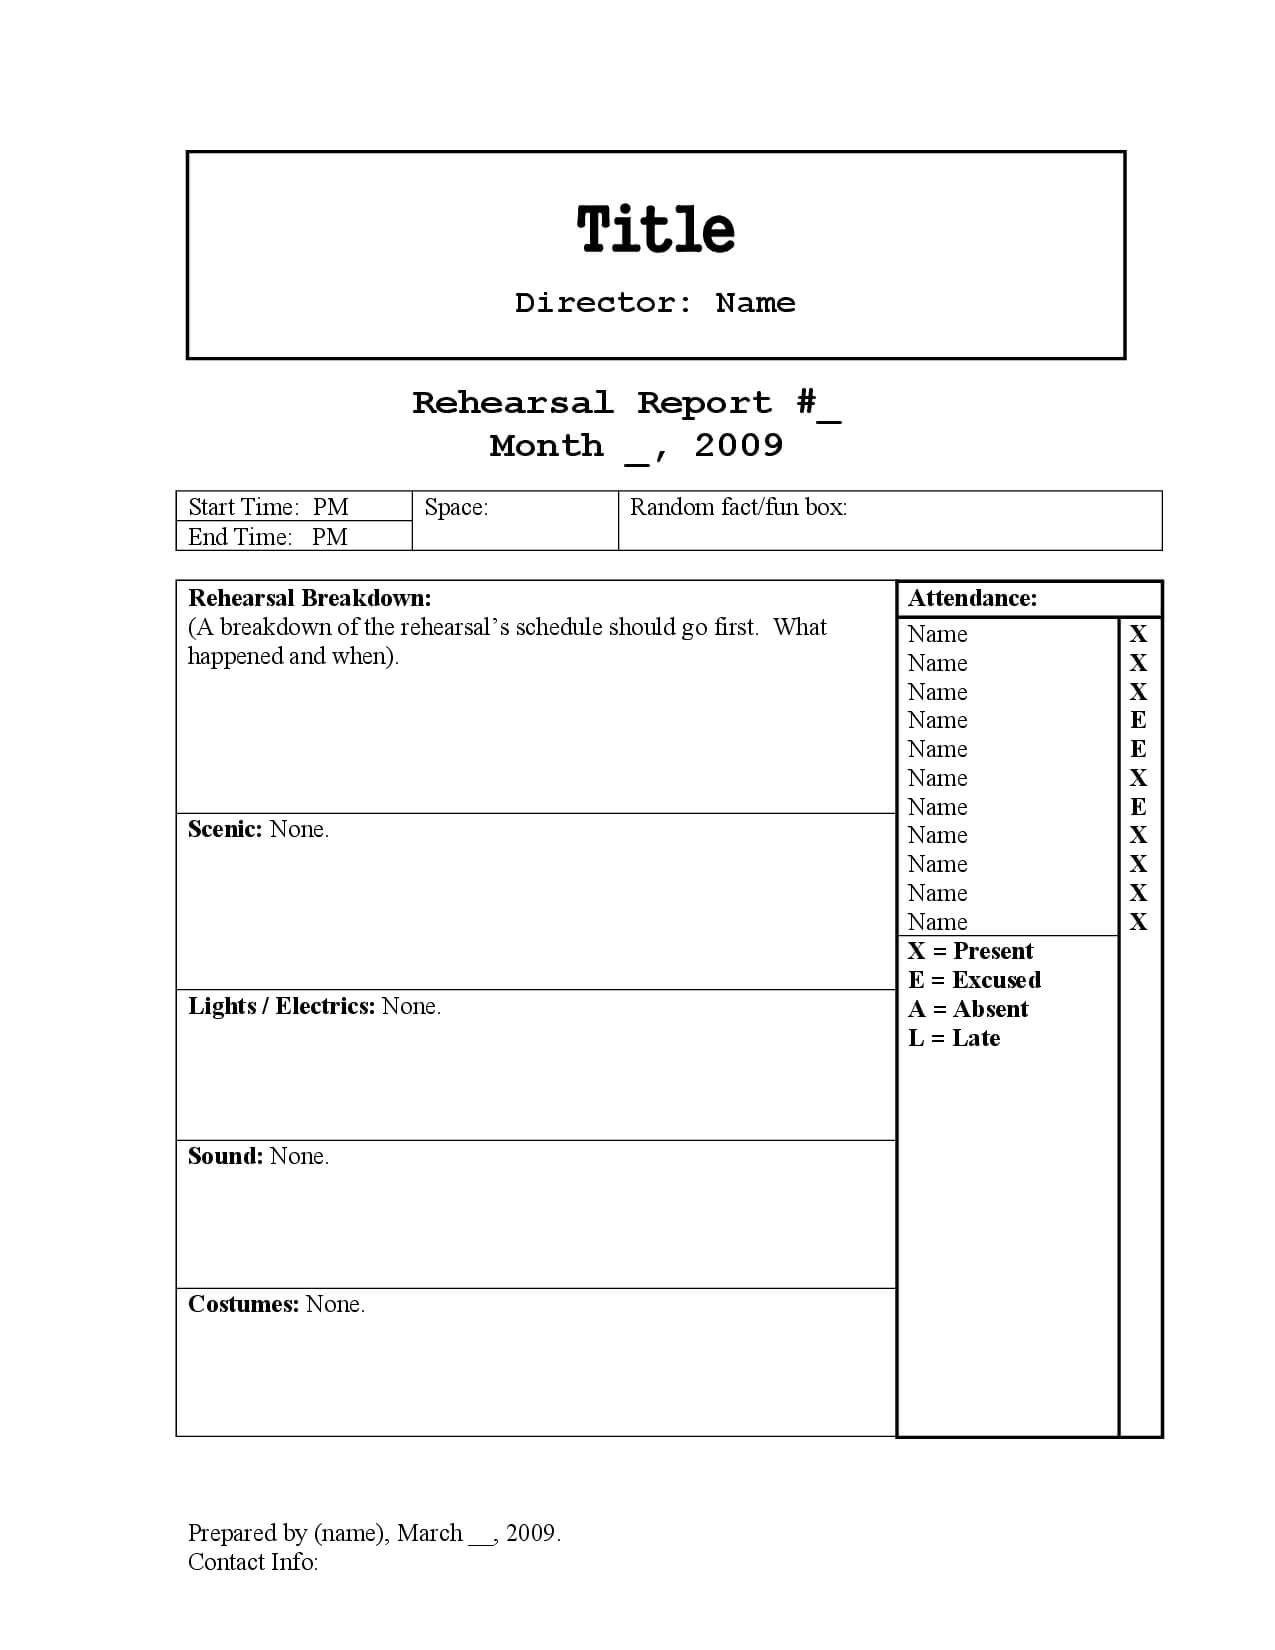 Rehearsal Report Template | Report Template, Resume Words Throughout Sound Report Template